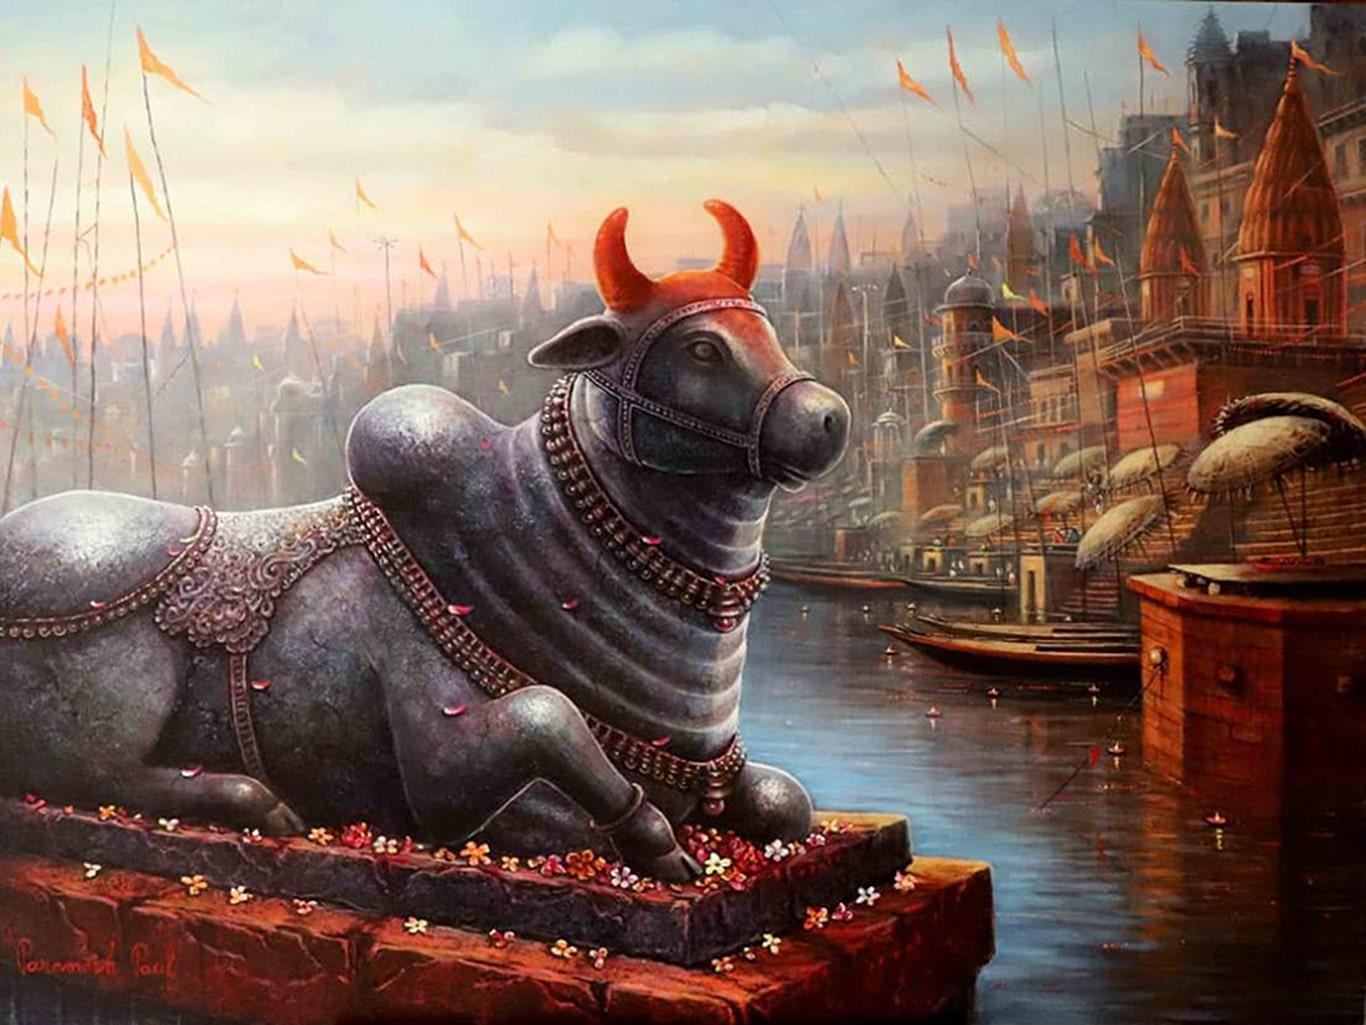 Paramesh Paul - Nandi, Acrylic on Canvas by Contemporary Indian Artist 